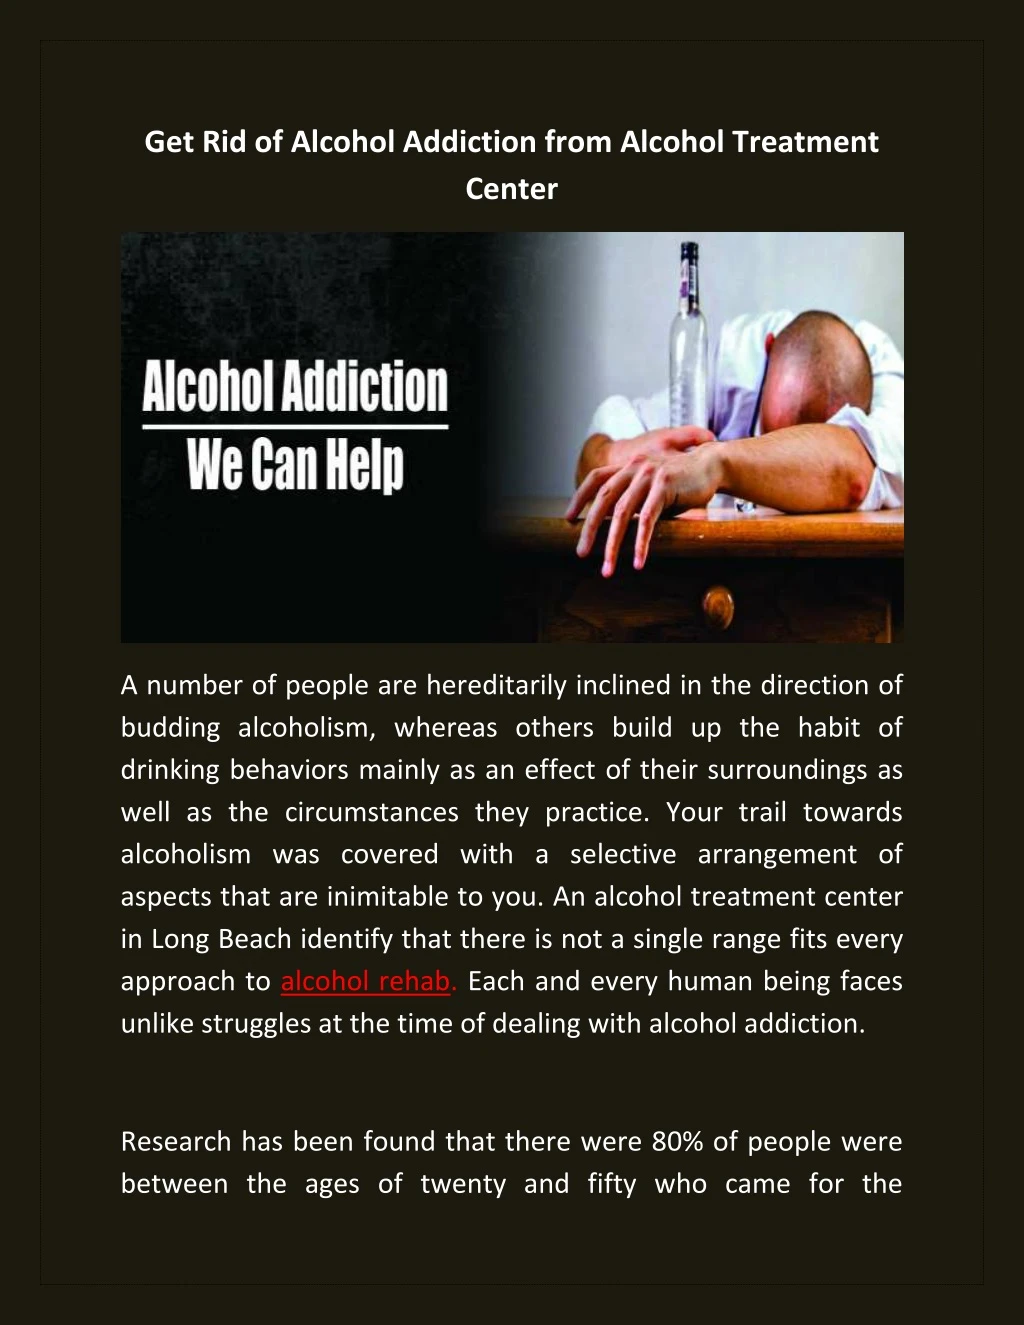 get rid of alcohol addiction from alcohol